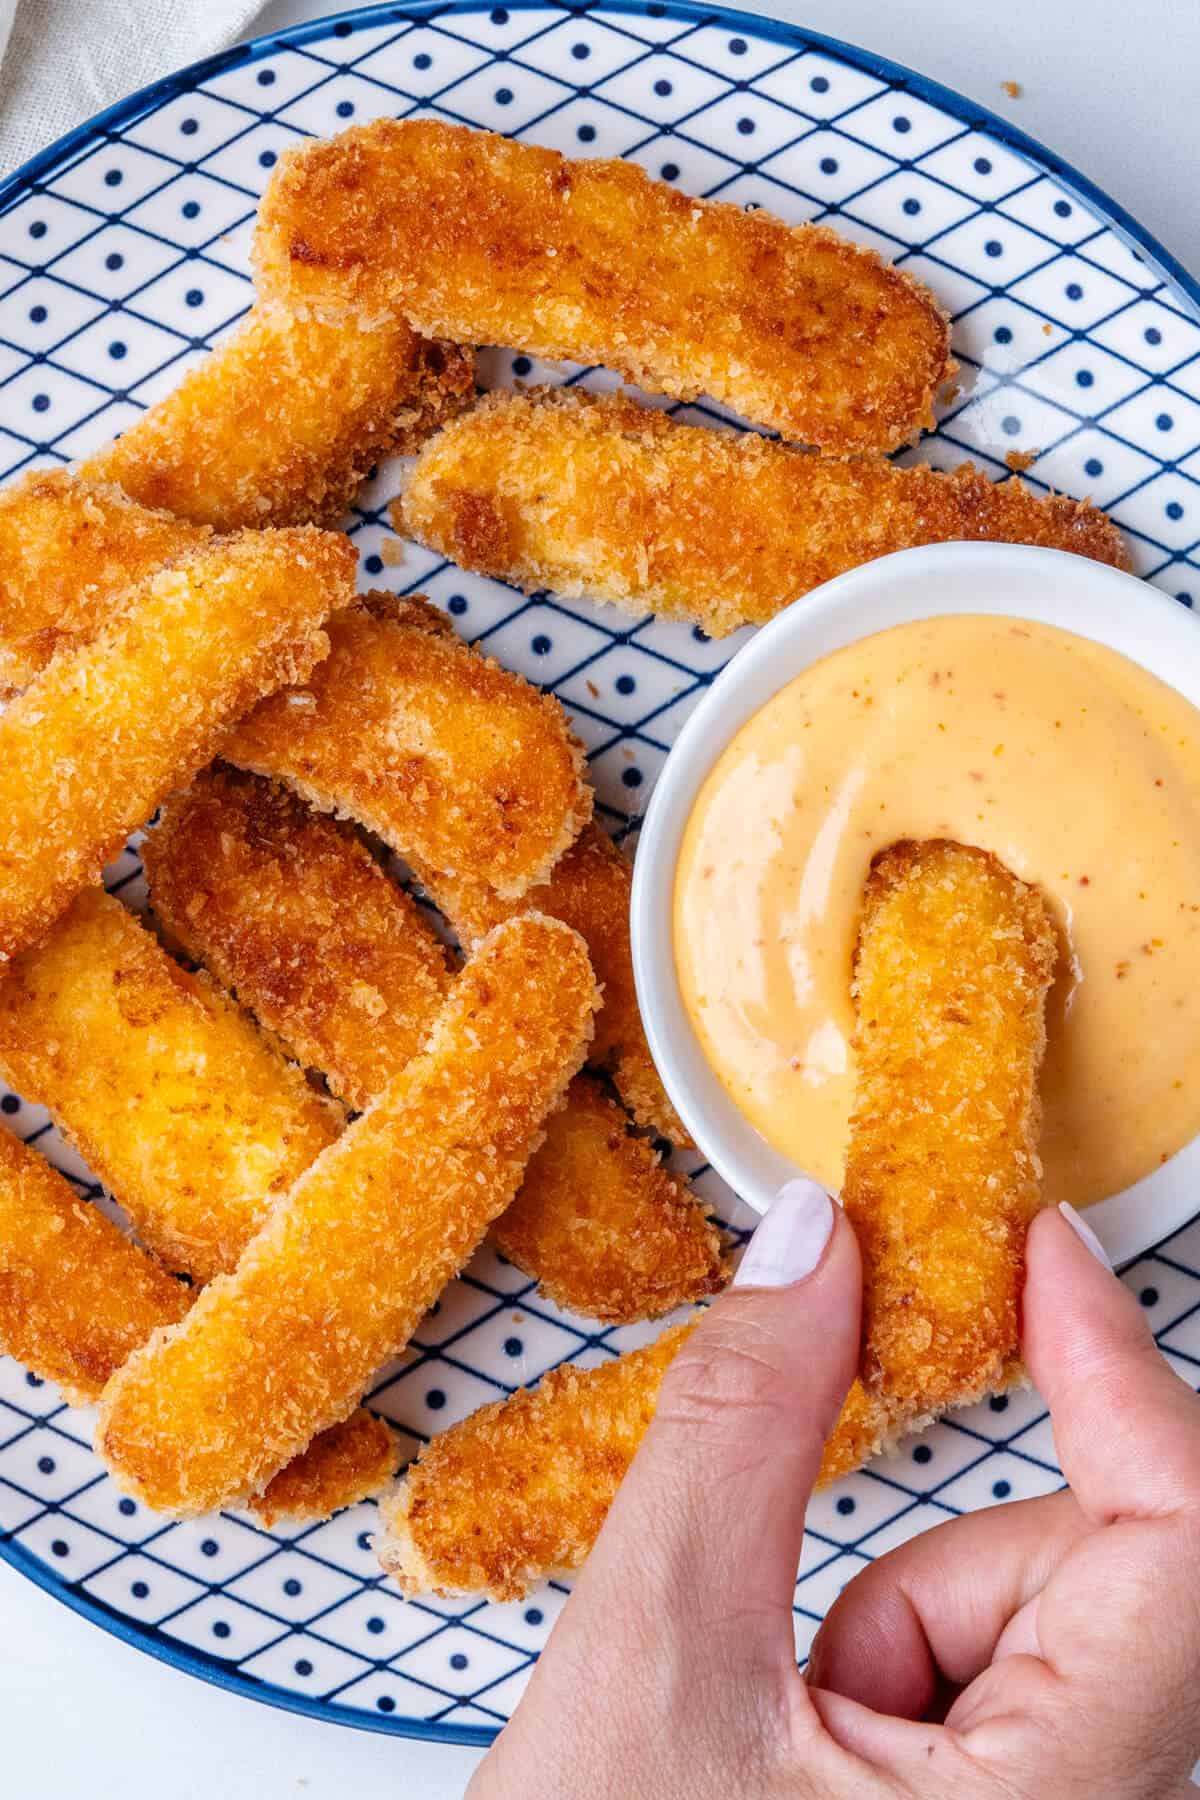 Plate of halloumi fries with one being dipped into aioli